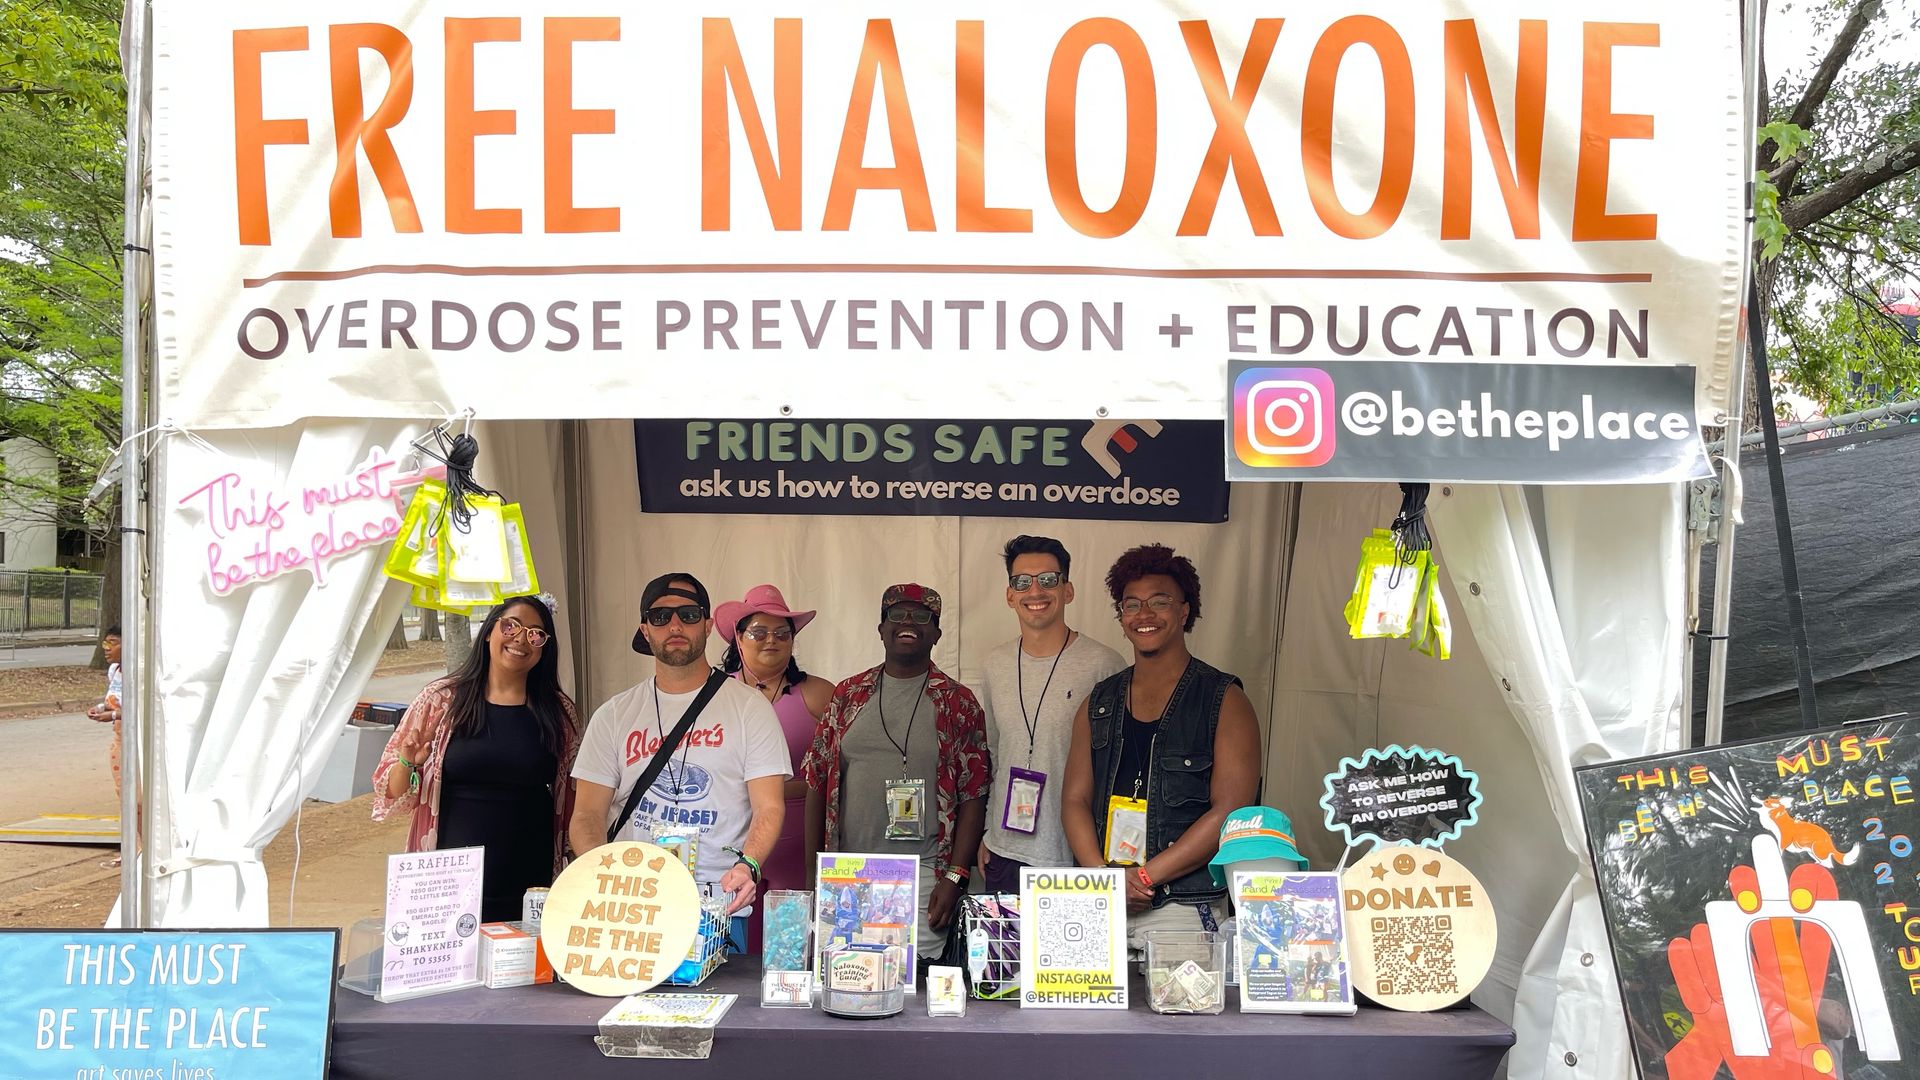 A white banner that reads "Free Naloxone" over a group of people inside a tent, surrounded by books and posters.